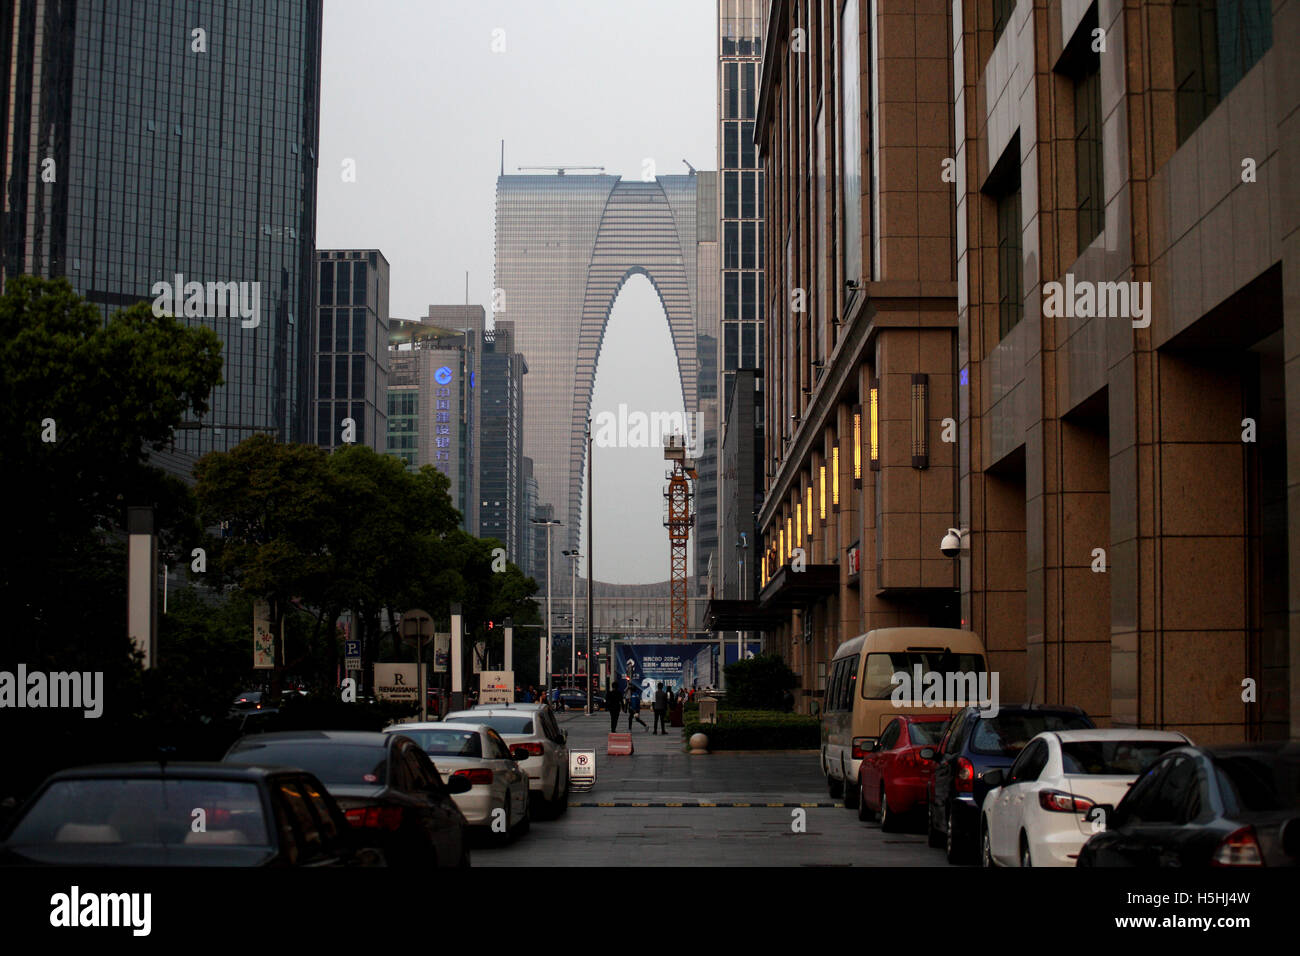 The architecturally exciting Oriental Gate seen at dusk with other high rise buildings around. Suzhou, China. 28.04.2016. Stock Photo